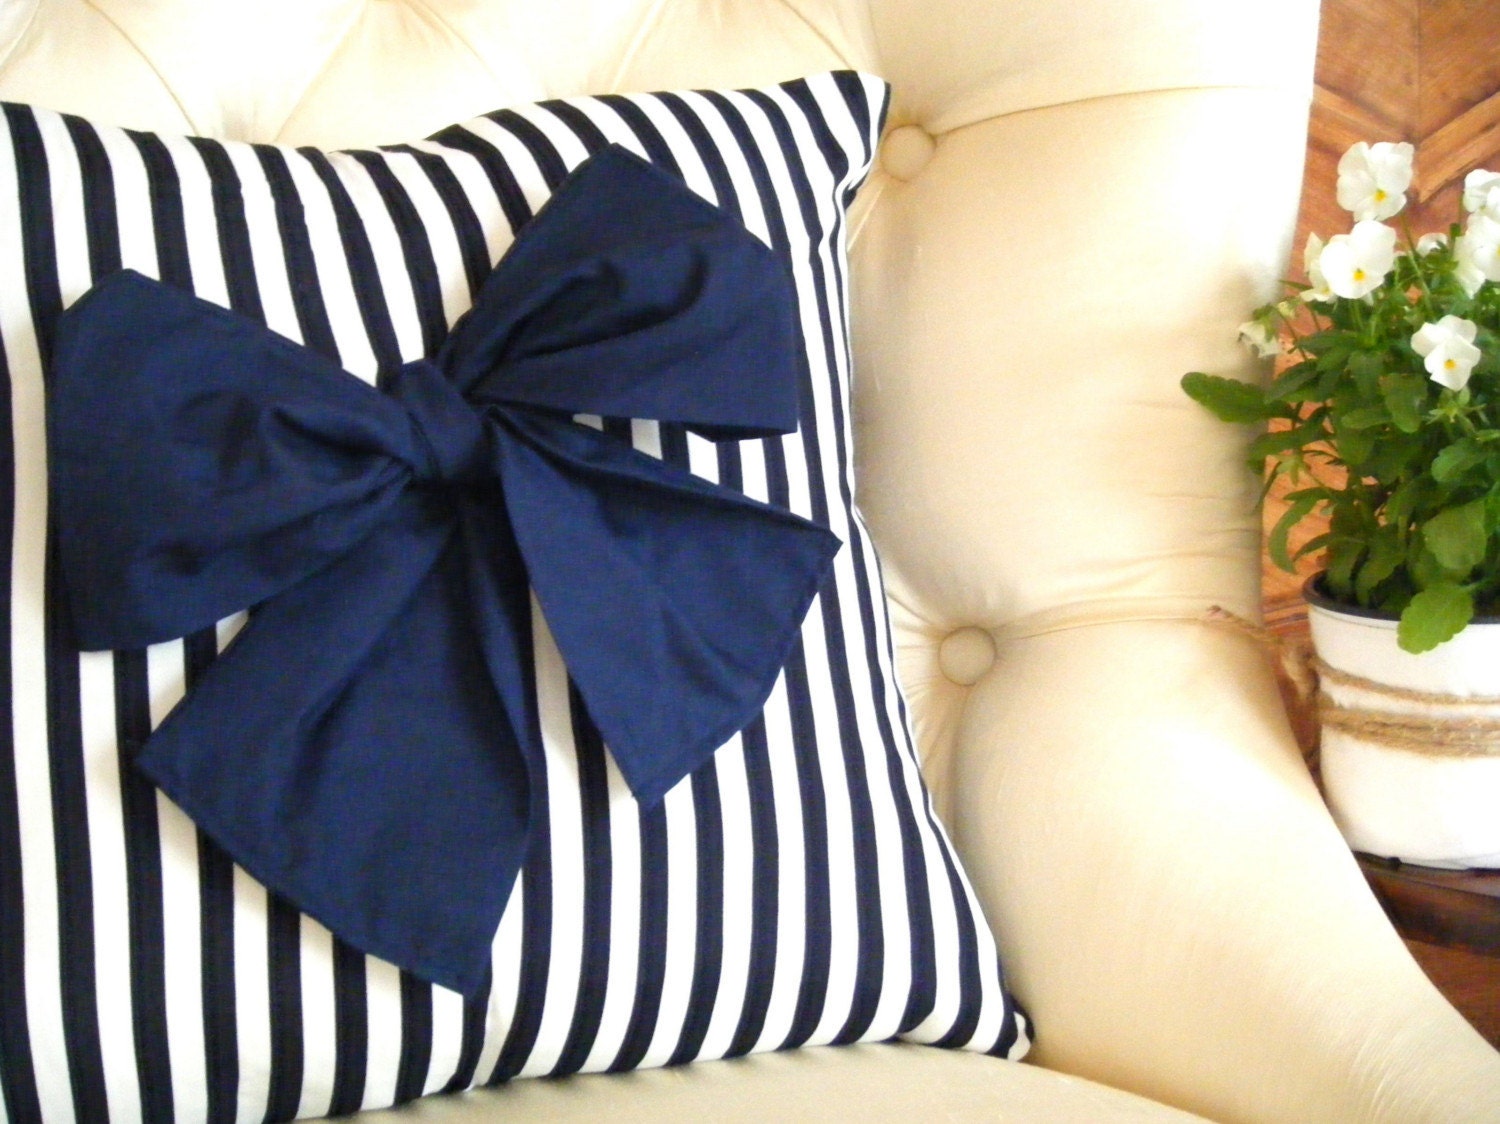 Preppy Love Cushion - Navy blue and white striped cushion with large navy blue bow